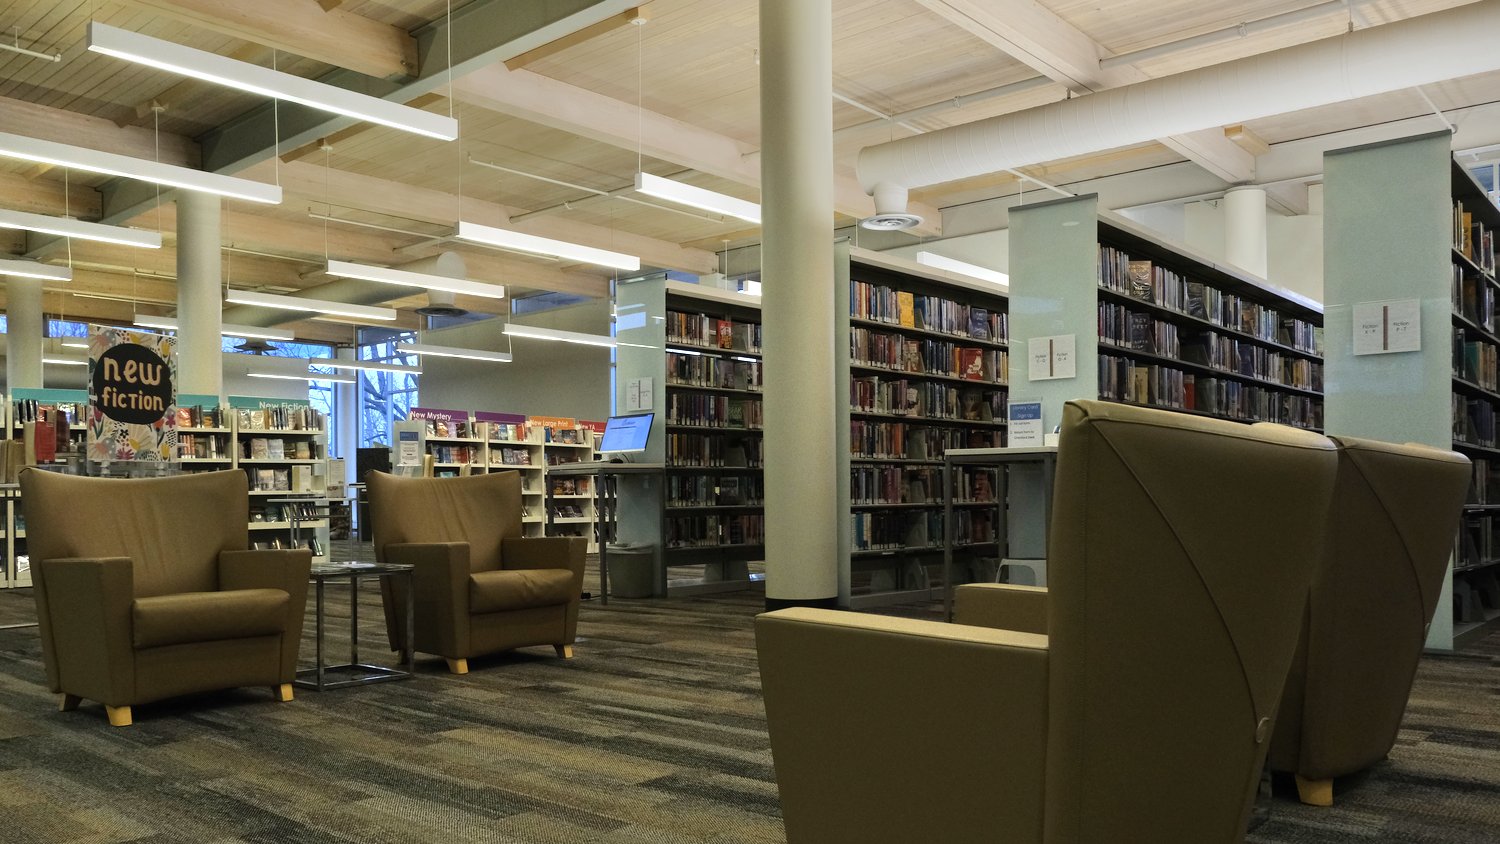 Comfy chairs throughout the library.